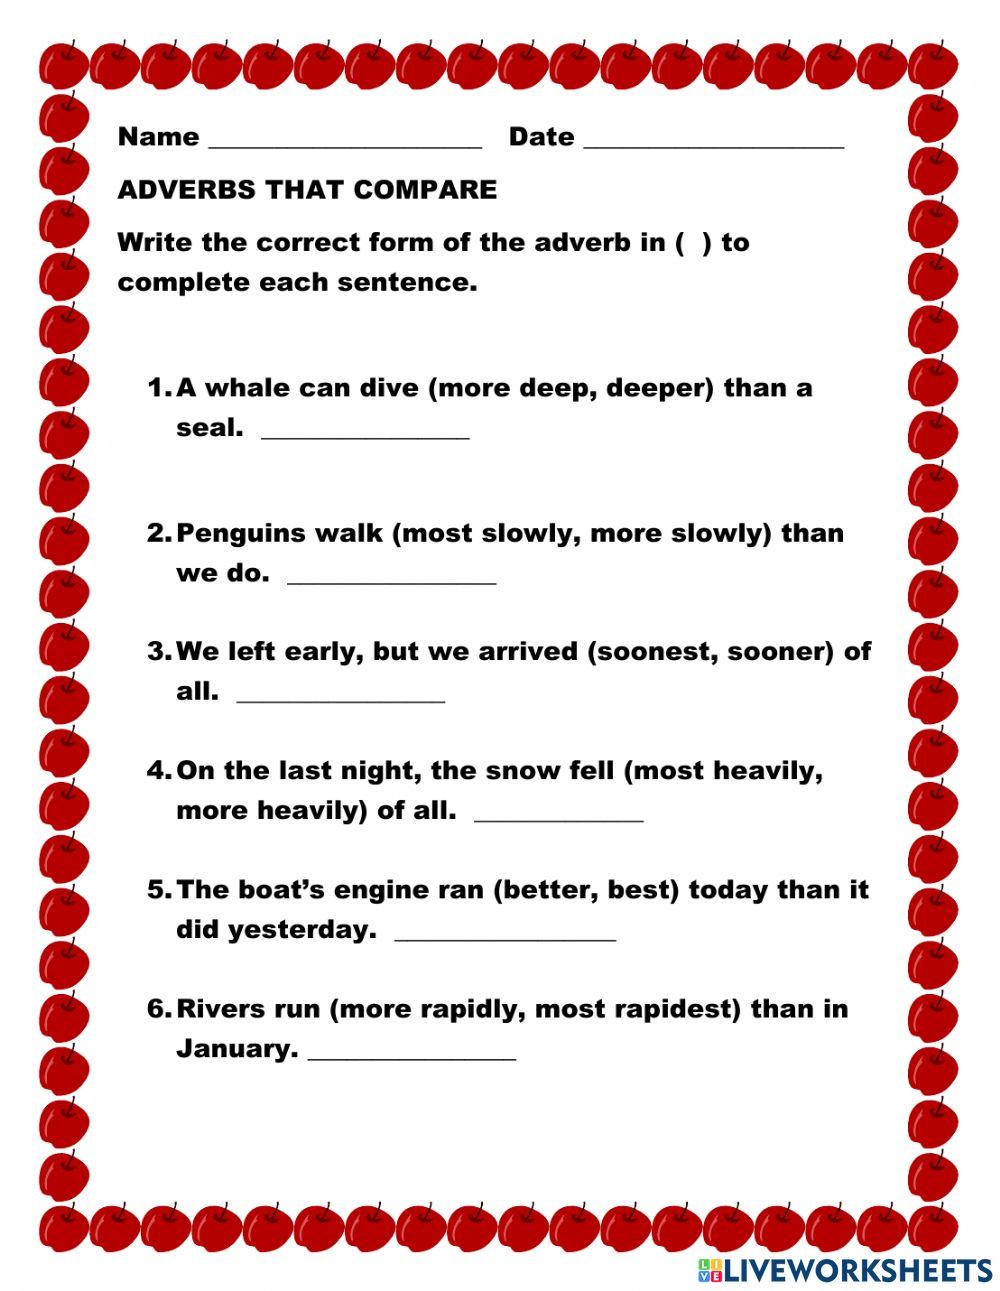 Adverbs That Compare